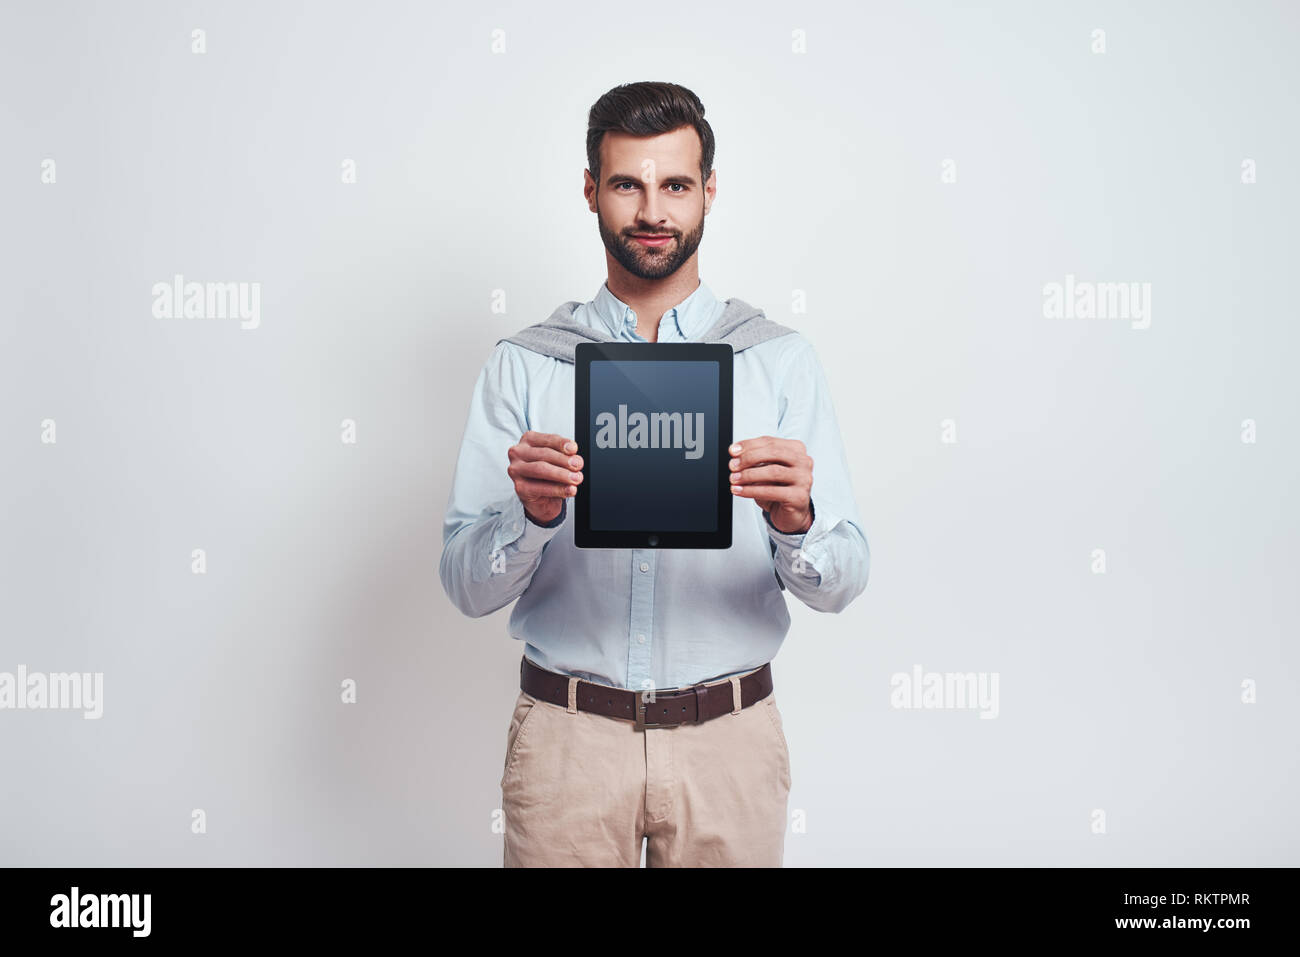 Look over here. An elegant handsome young man holding and showing the screen of a digital touchpad while standing on a grey background. Digital concept. Stock Photo